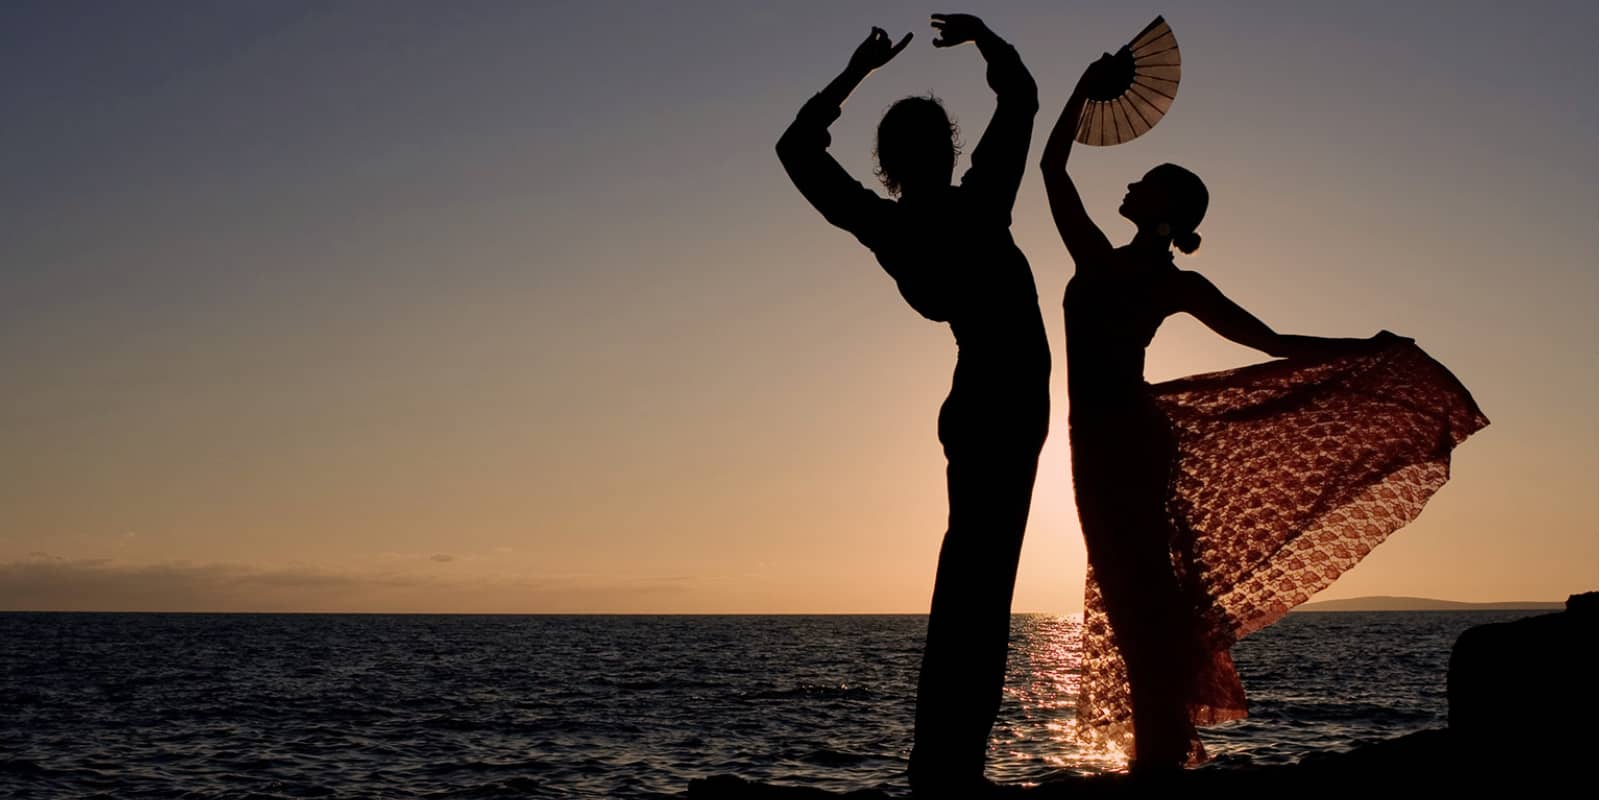 Flamenco guitarist and dancer perform by the water during sunset.